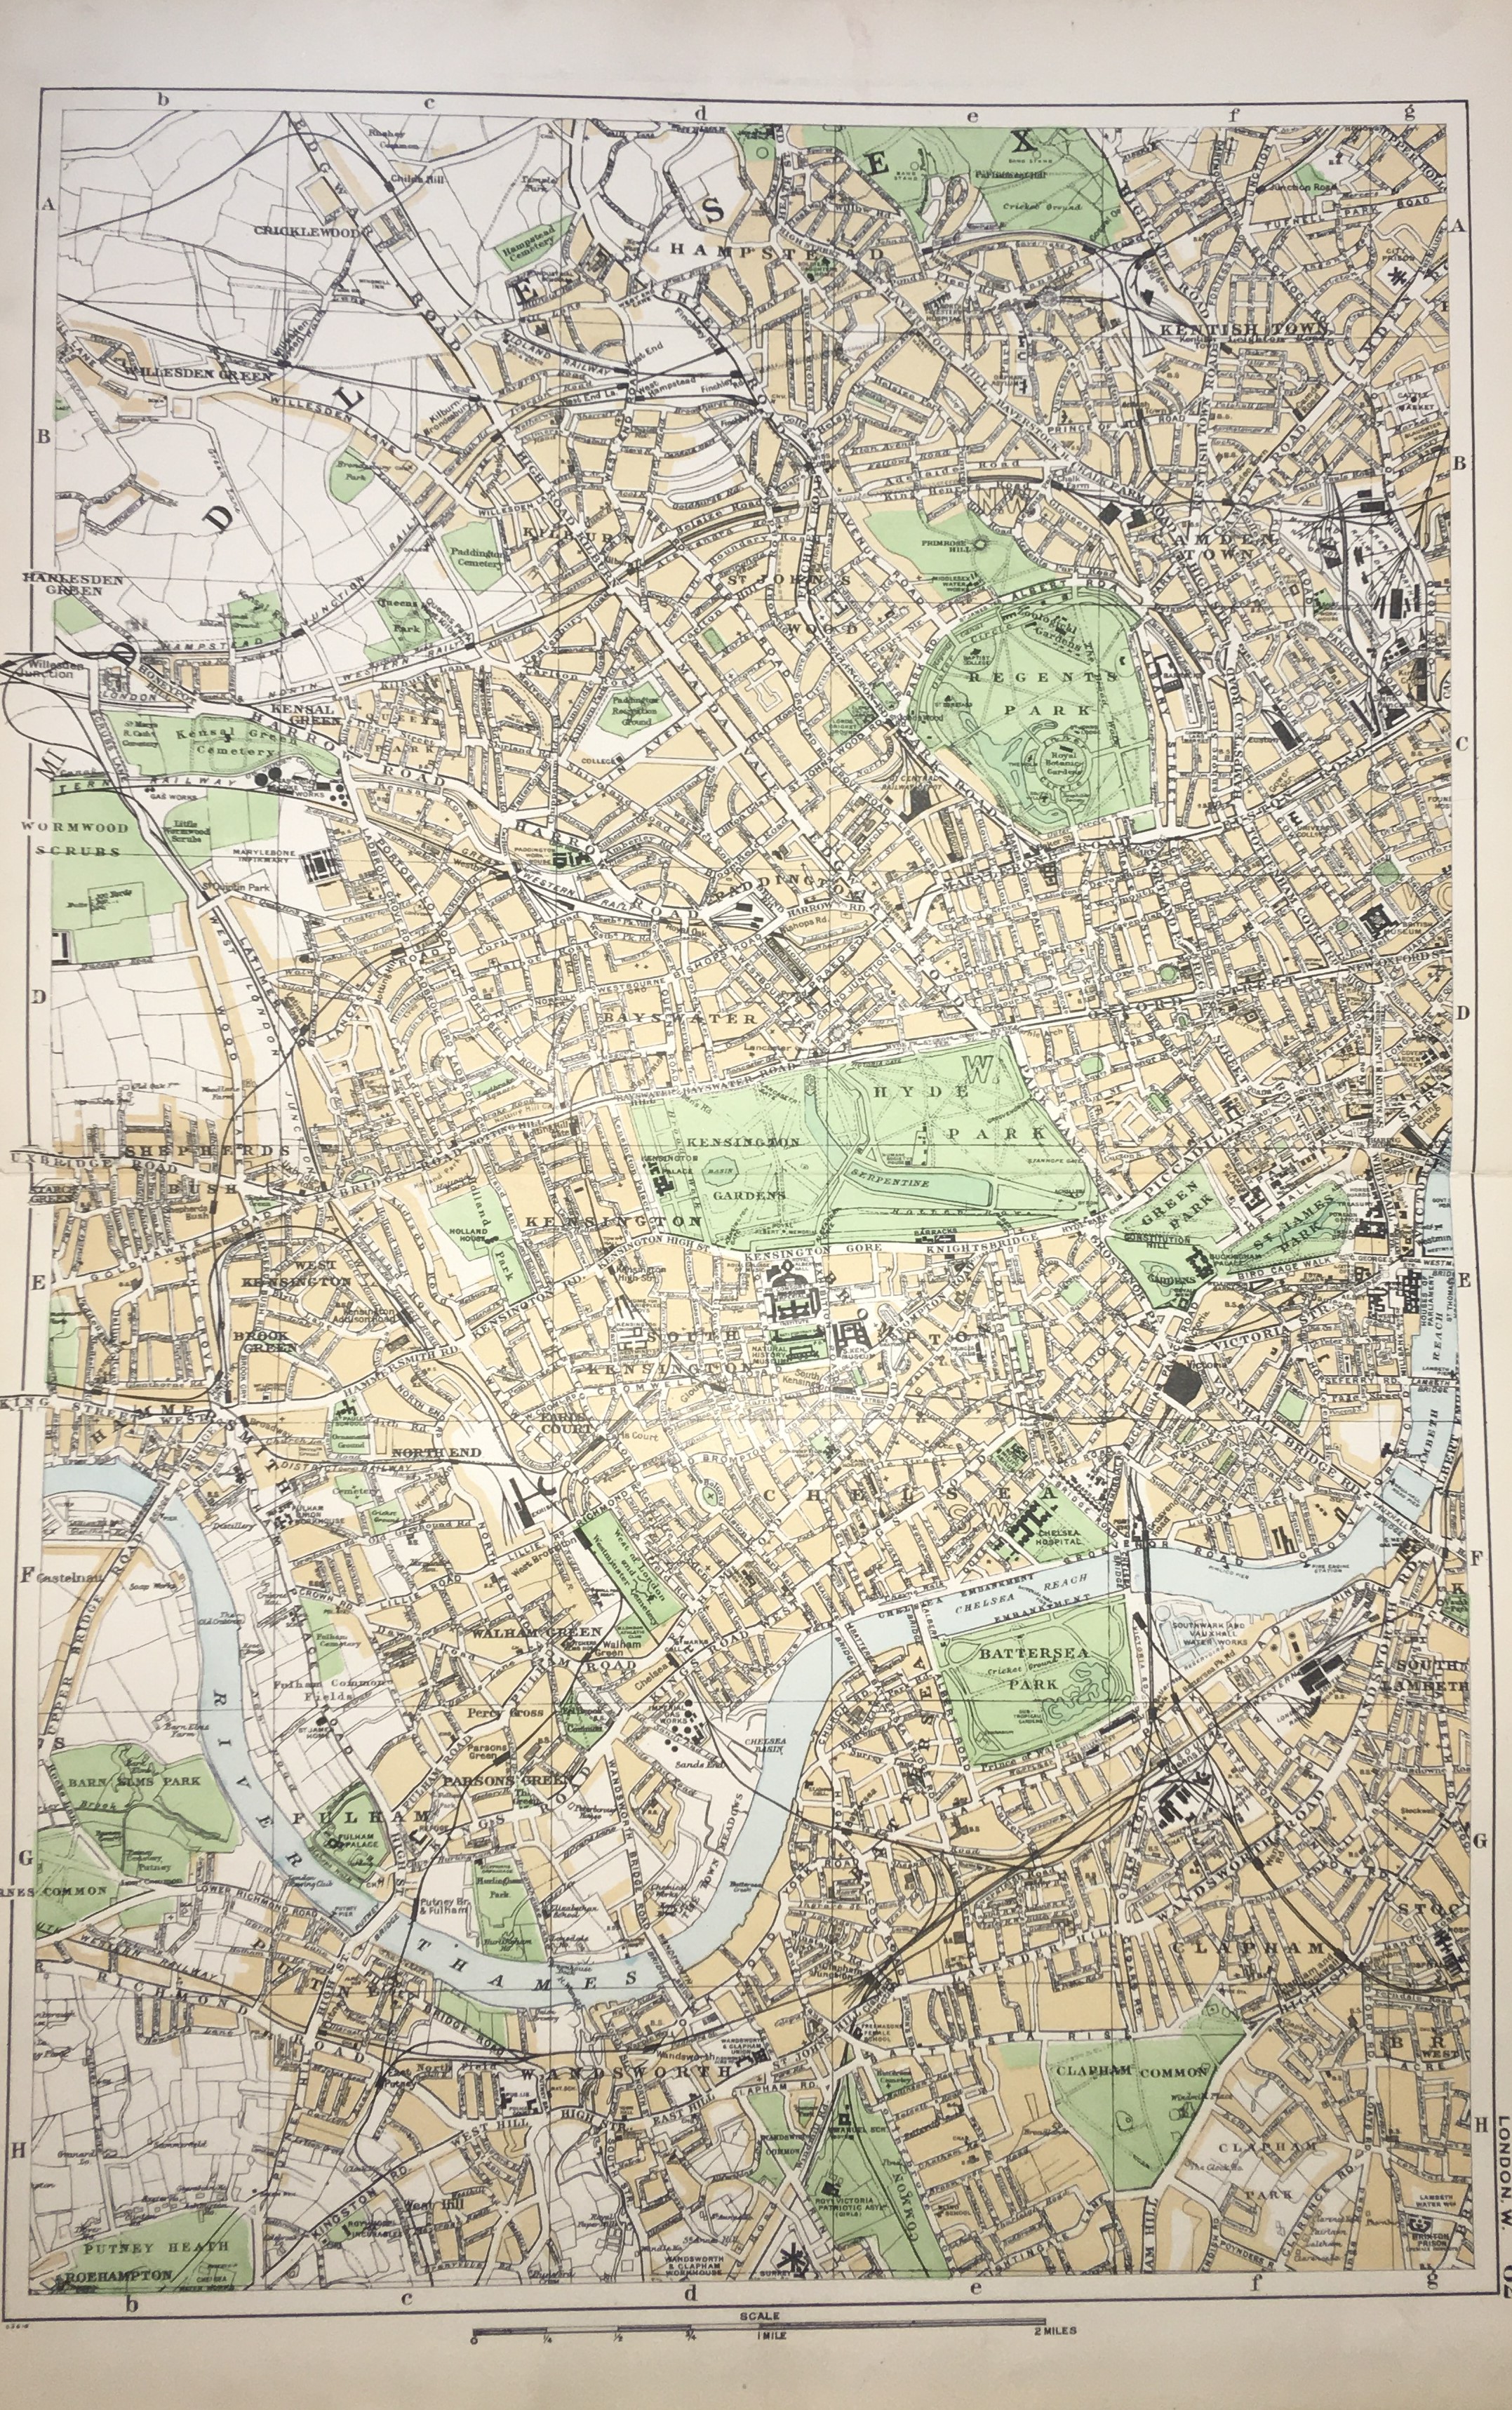 The West End Of London Victorian Street Areas Map GW Bacon 1899.